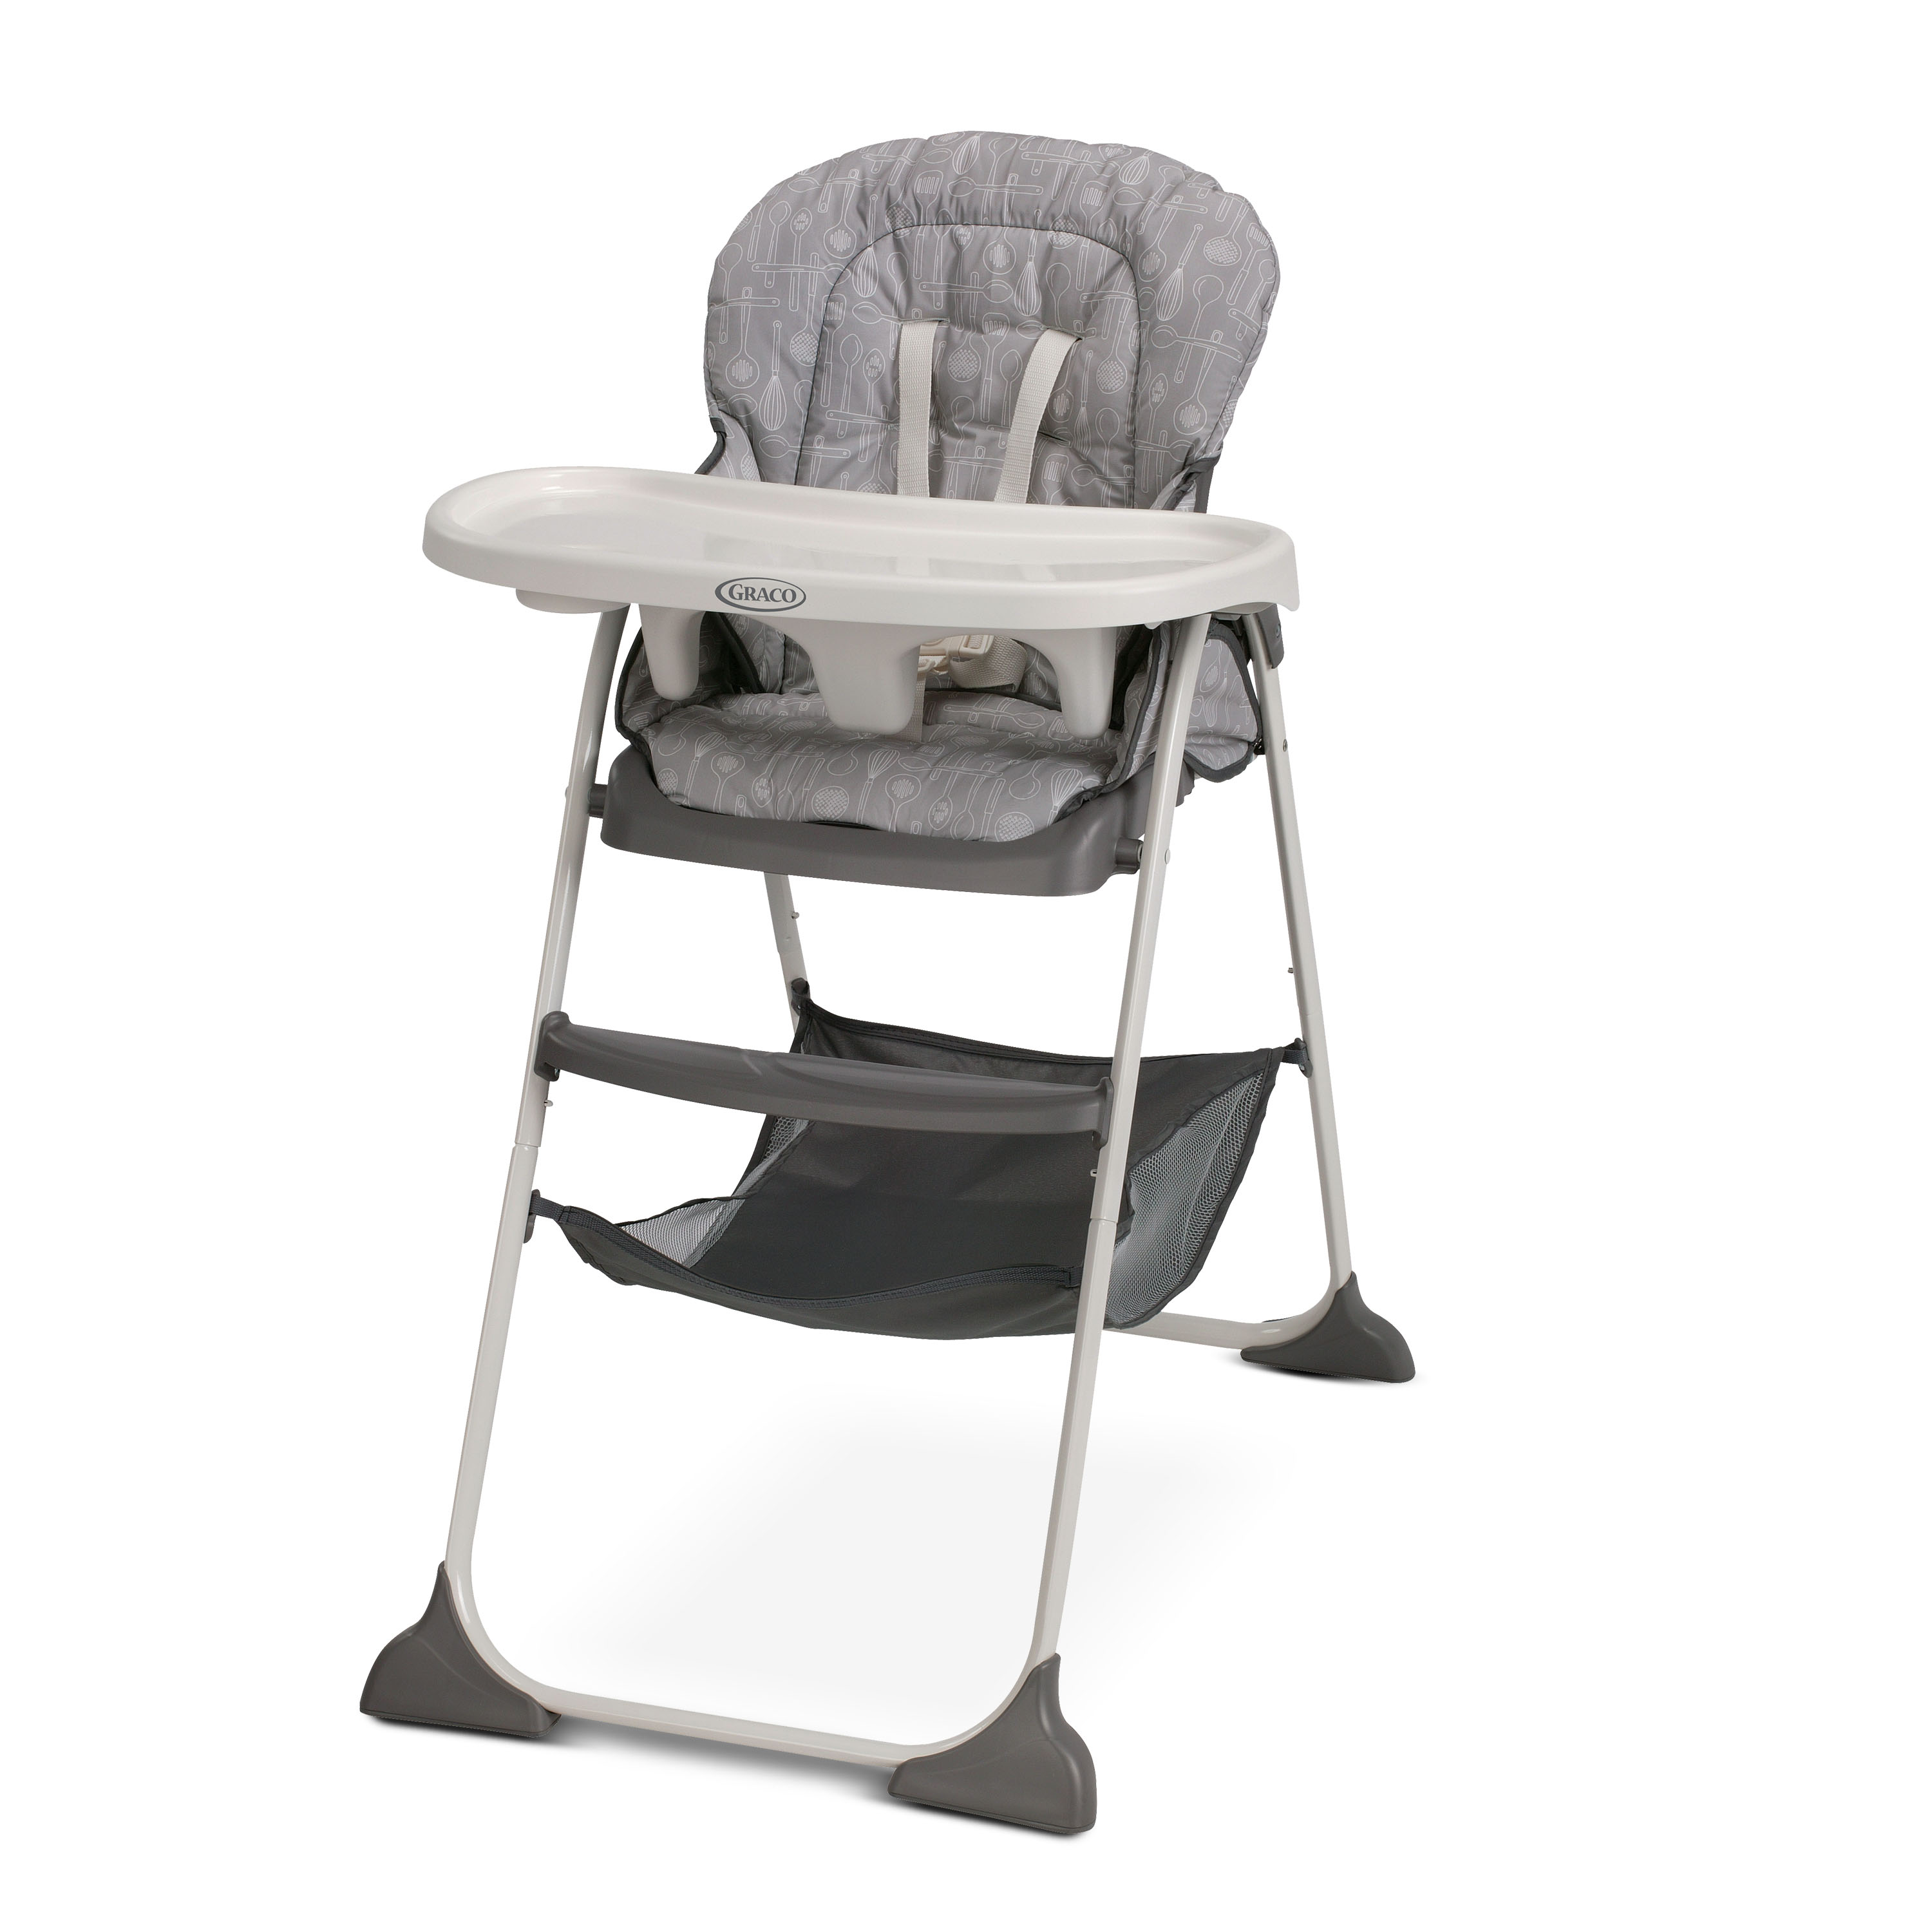 Graco Slim Snacker High Chair, Whisk - image 1 of 8